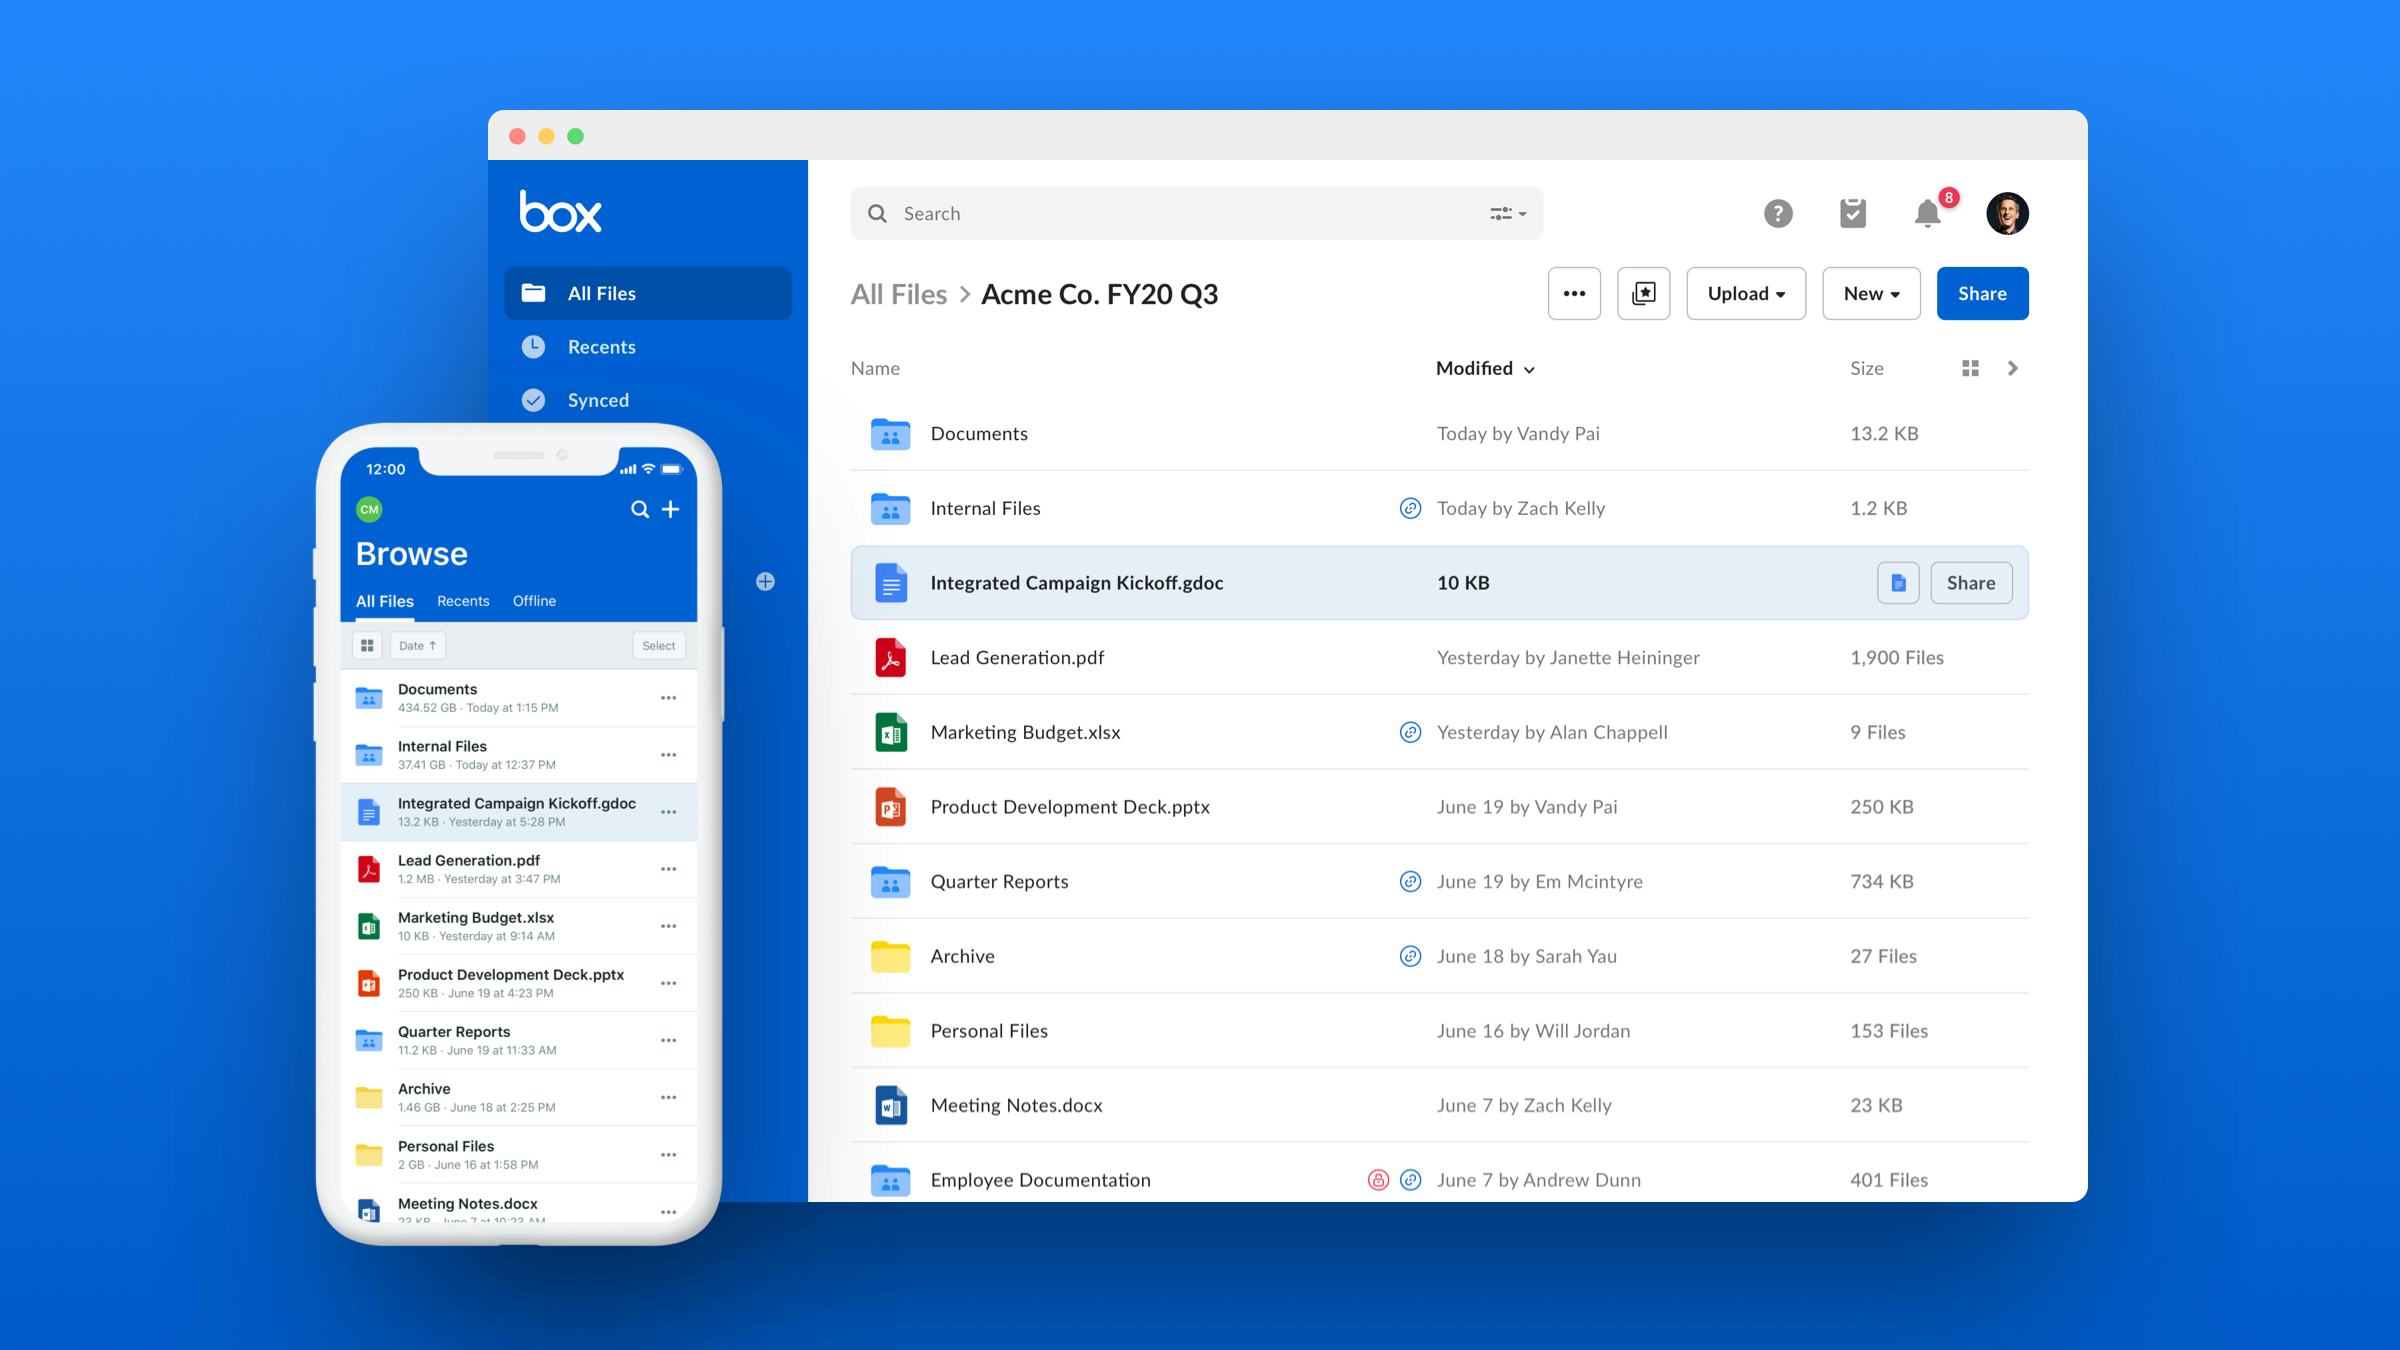 Box Software - Work from anywhere across any device. Securely share files with your team, customers or external agencies with the Box Mobile app.